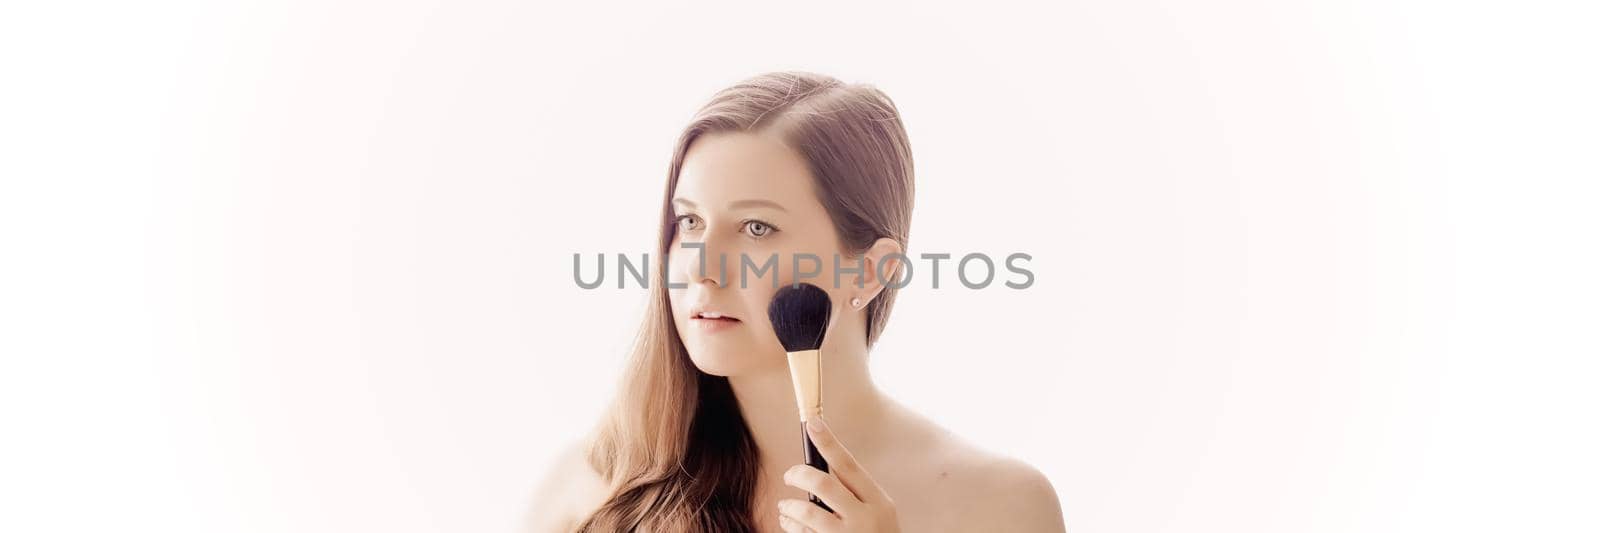 Beautiful woman with makeup brush, perfect skin and shiny hair as make-up, health and wellness concept. Face portrait of young female model for skincare cosmetics and luxury beauty ad design.